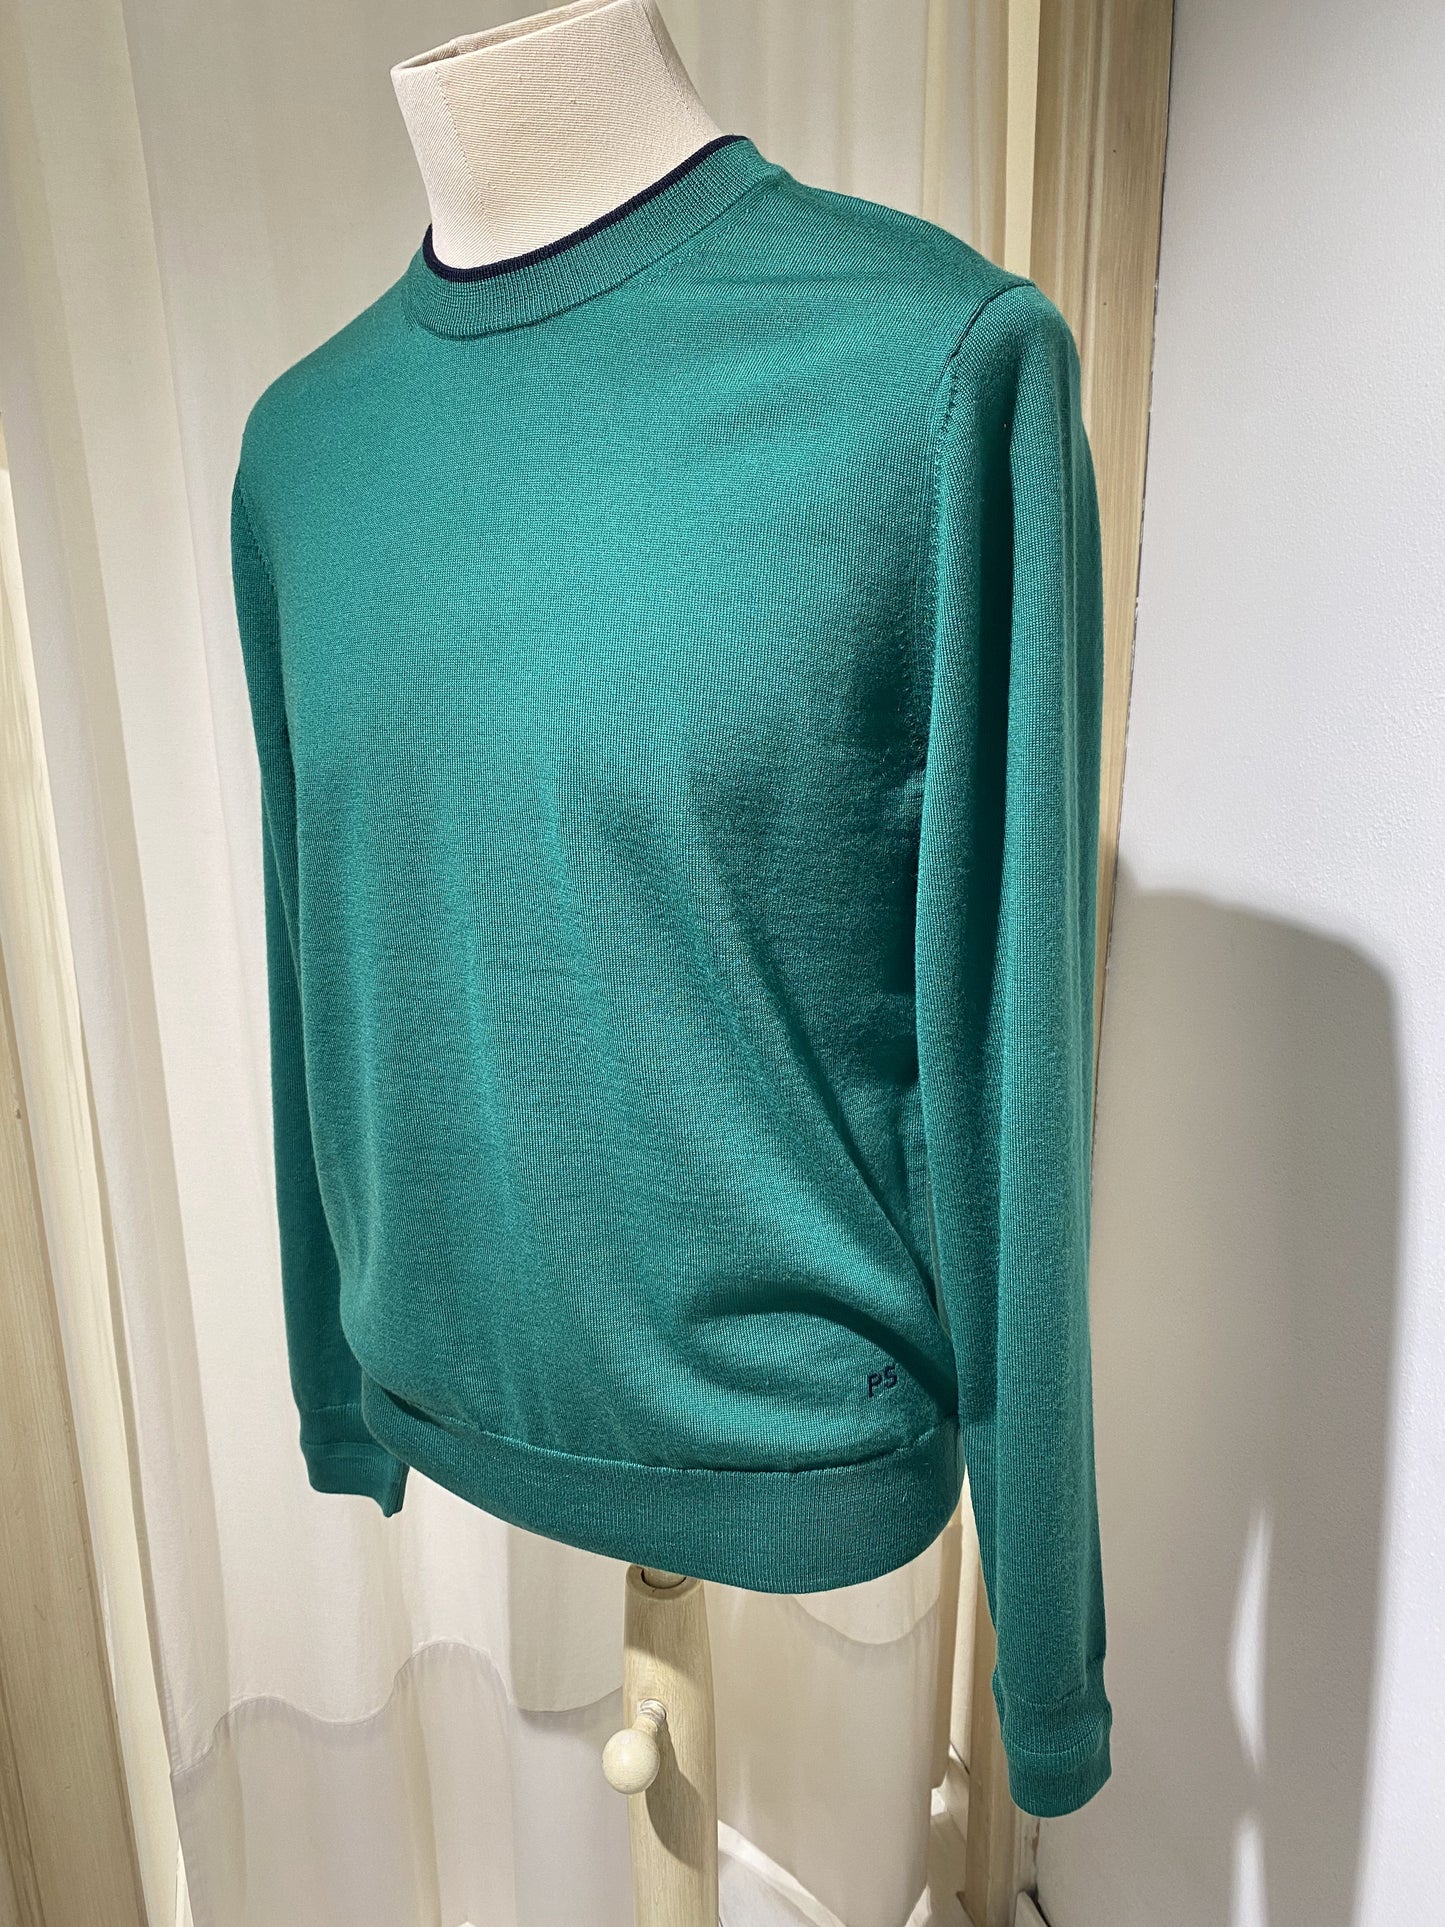 M KNITWEAR ROUND NECK PS PAUL SMITH PINE GREEN